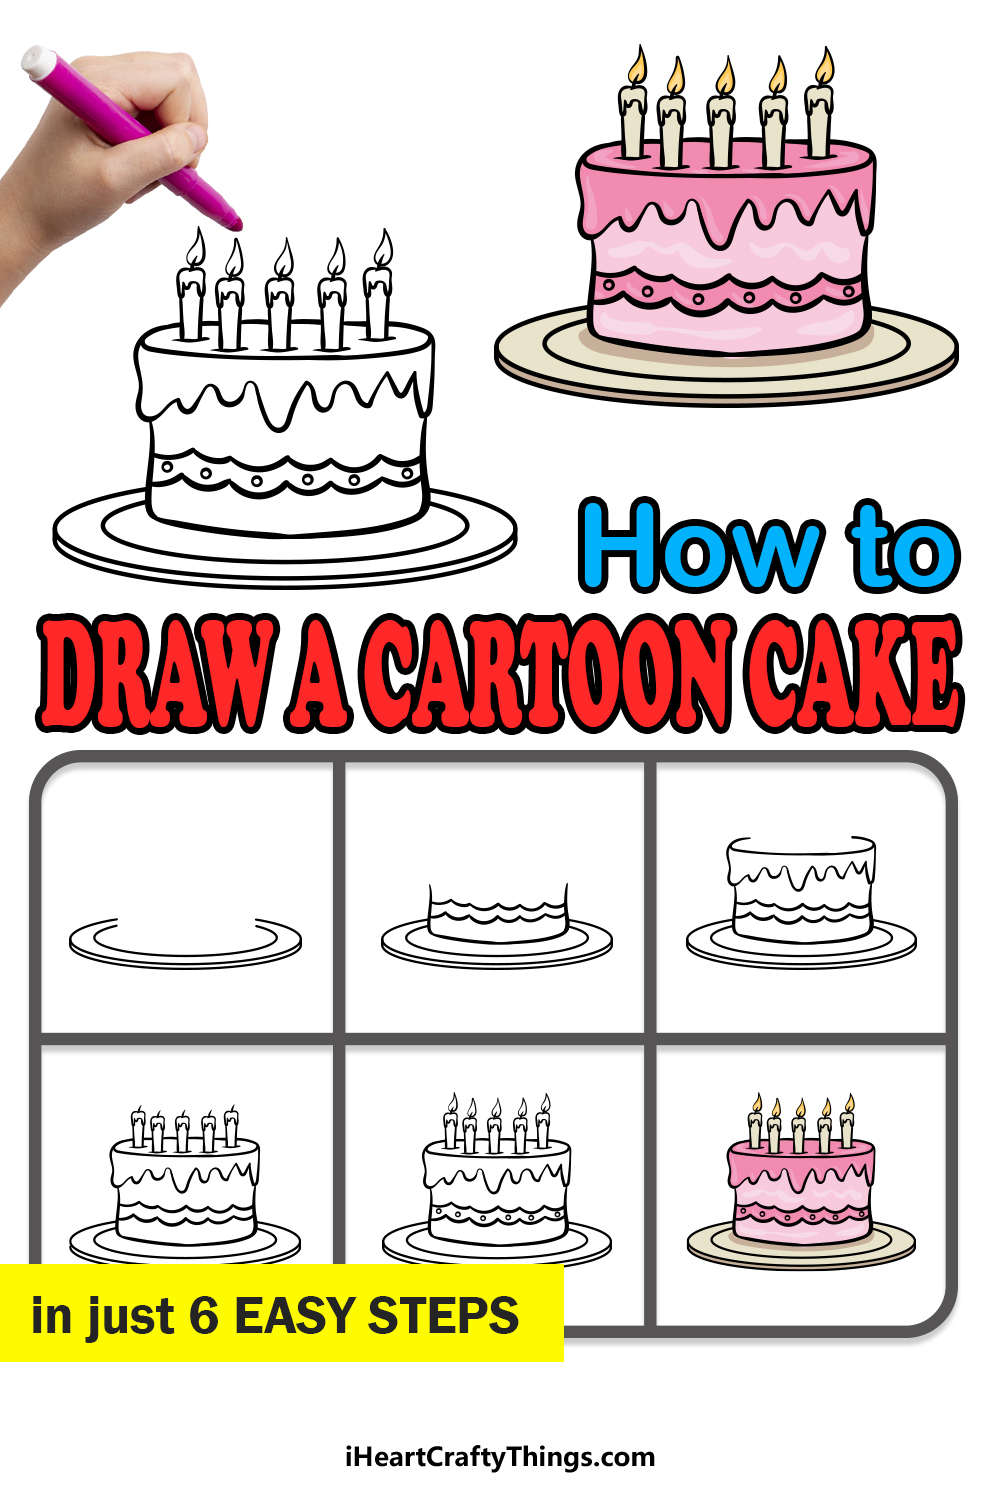 how to draw a cartoon cake in 6 easy steps